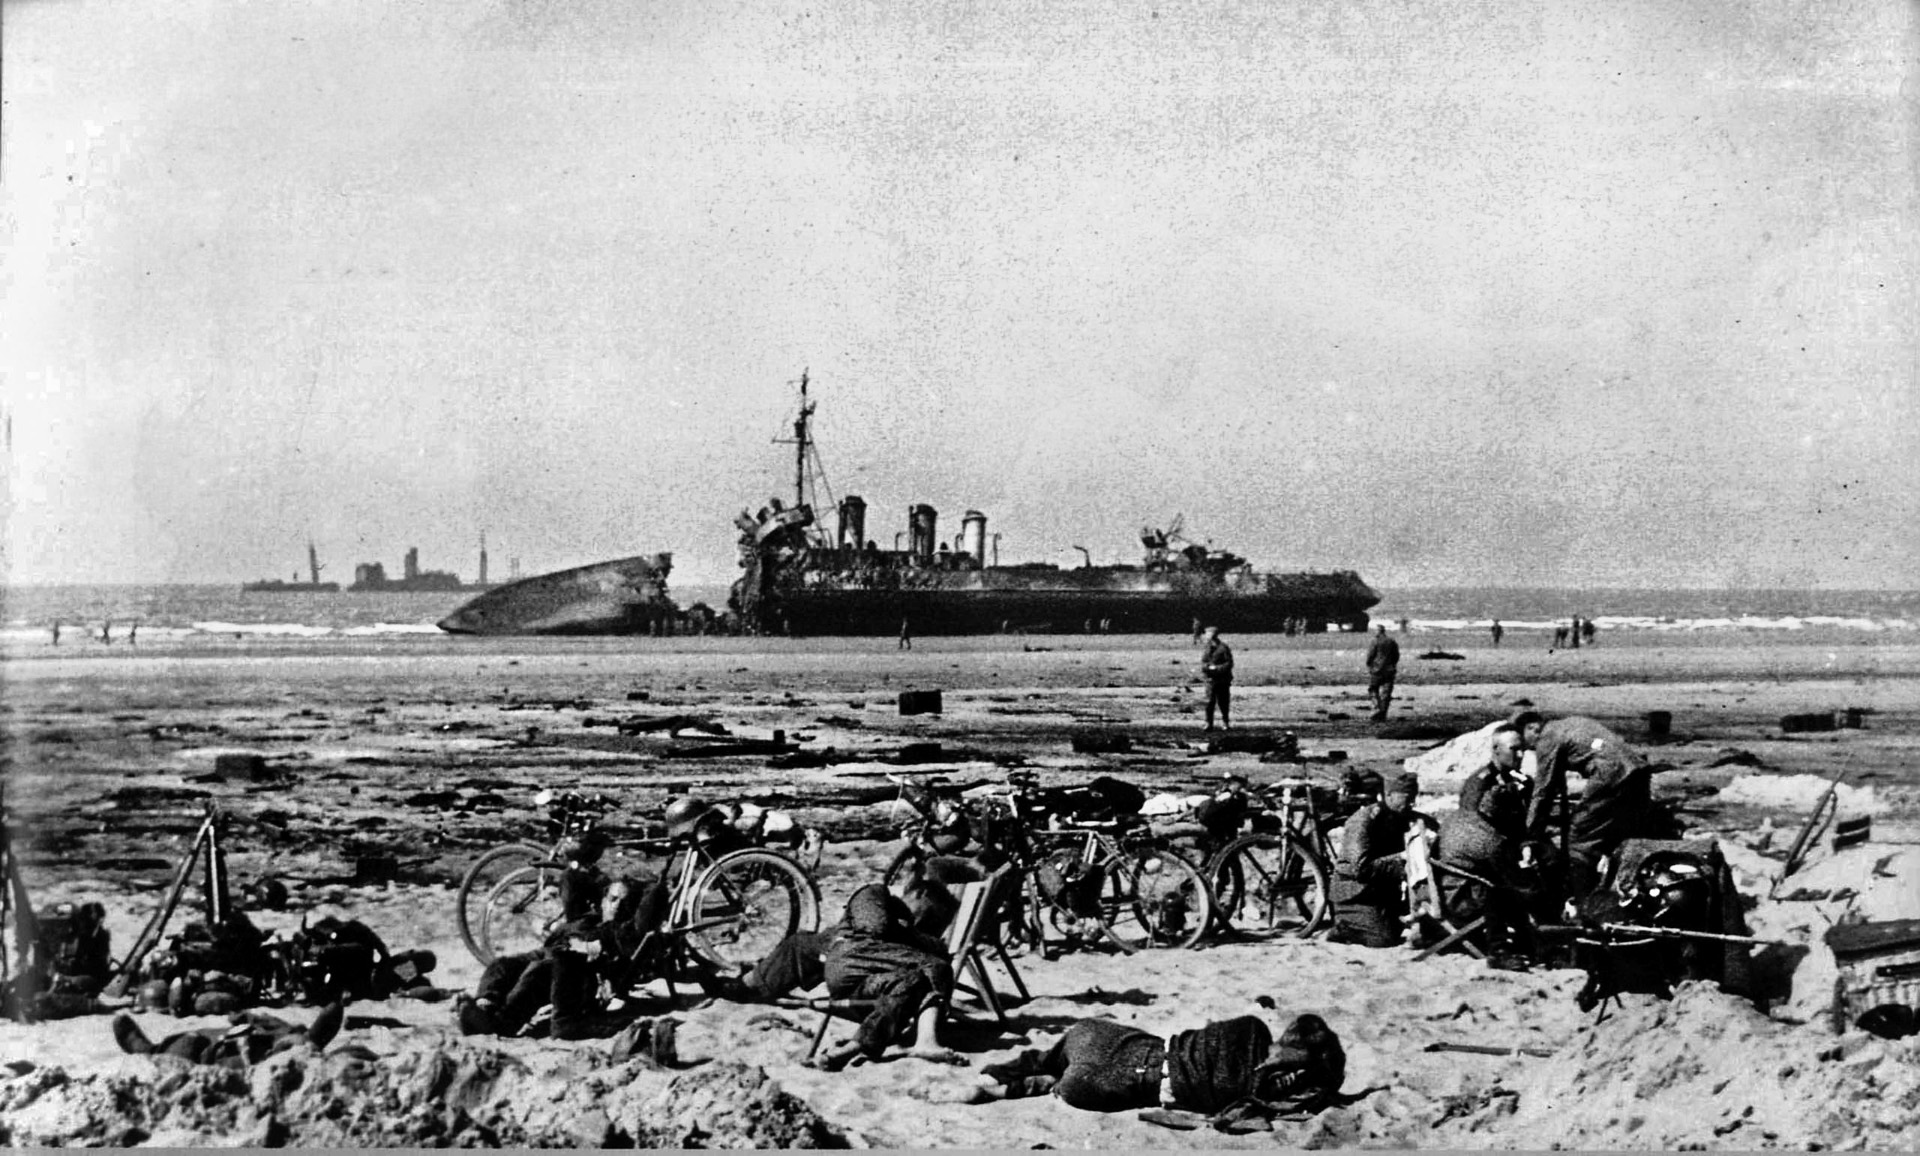 The French destroyer L’Adroit lies a twisted wreck off the shore of Dunkirk while German soldiers relax on the beach in the foreground following the withdrawal of the British Expeditionary Force.